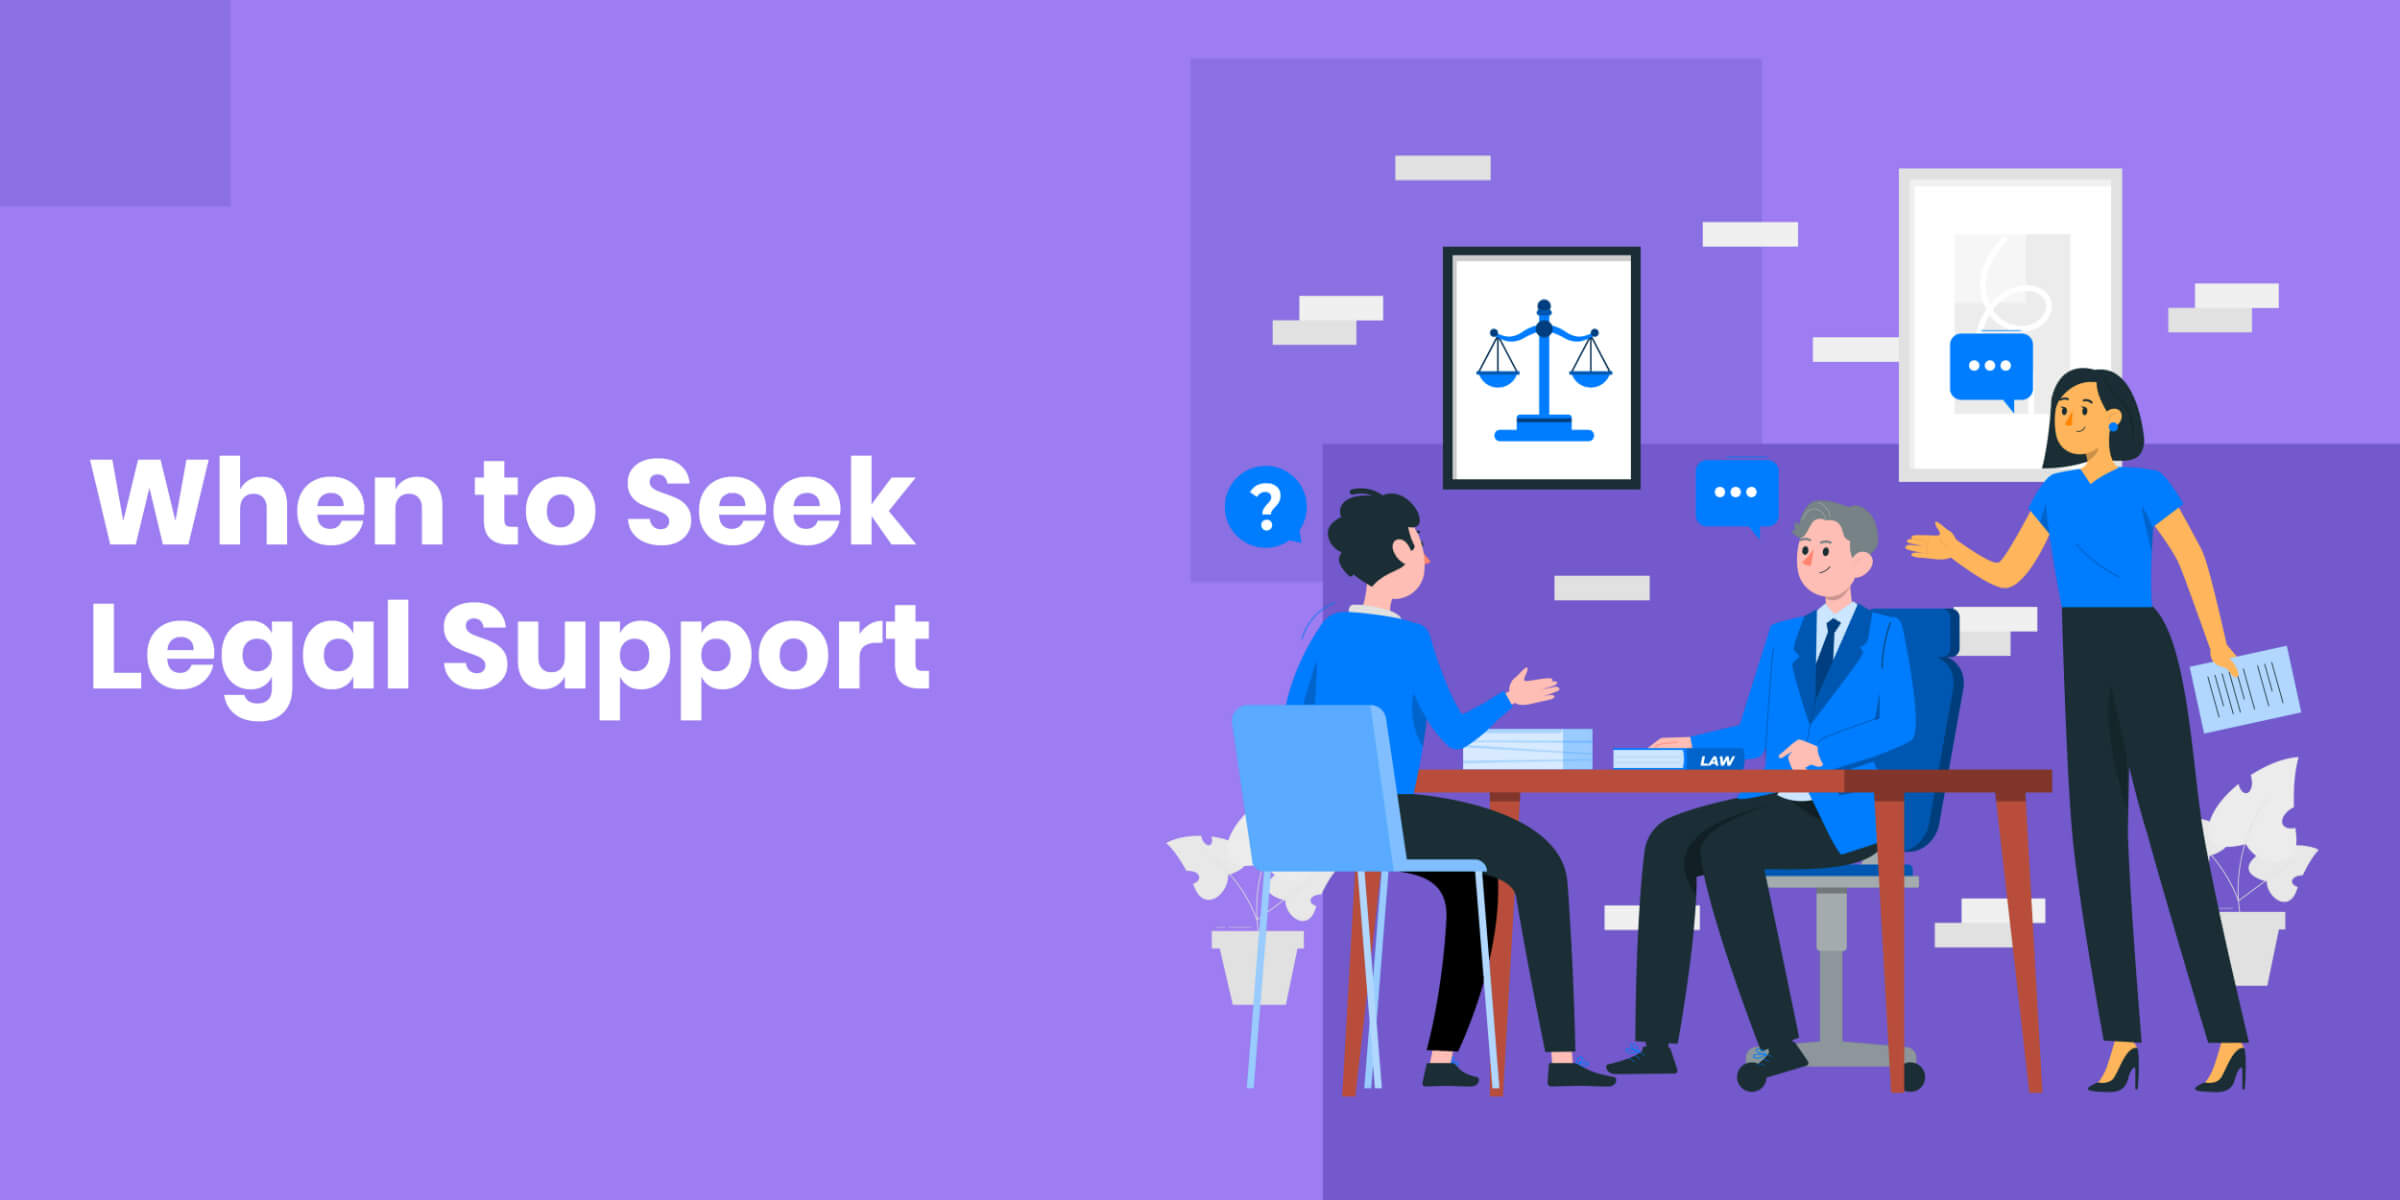 When to Seek Legal Support